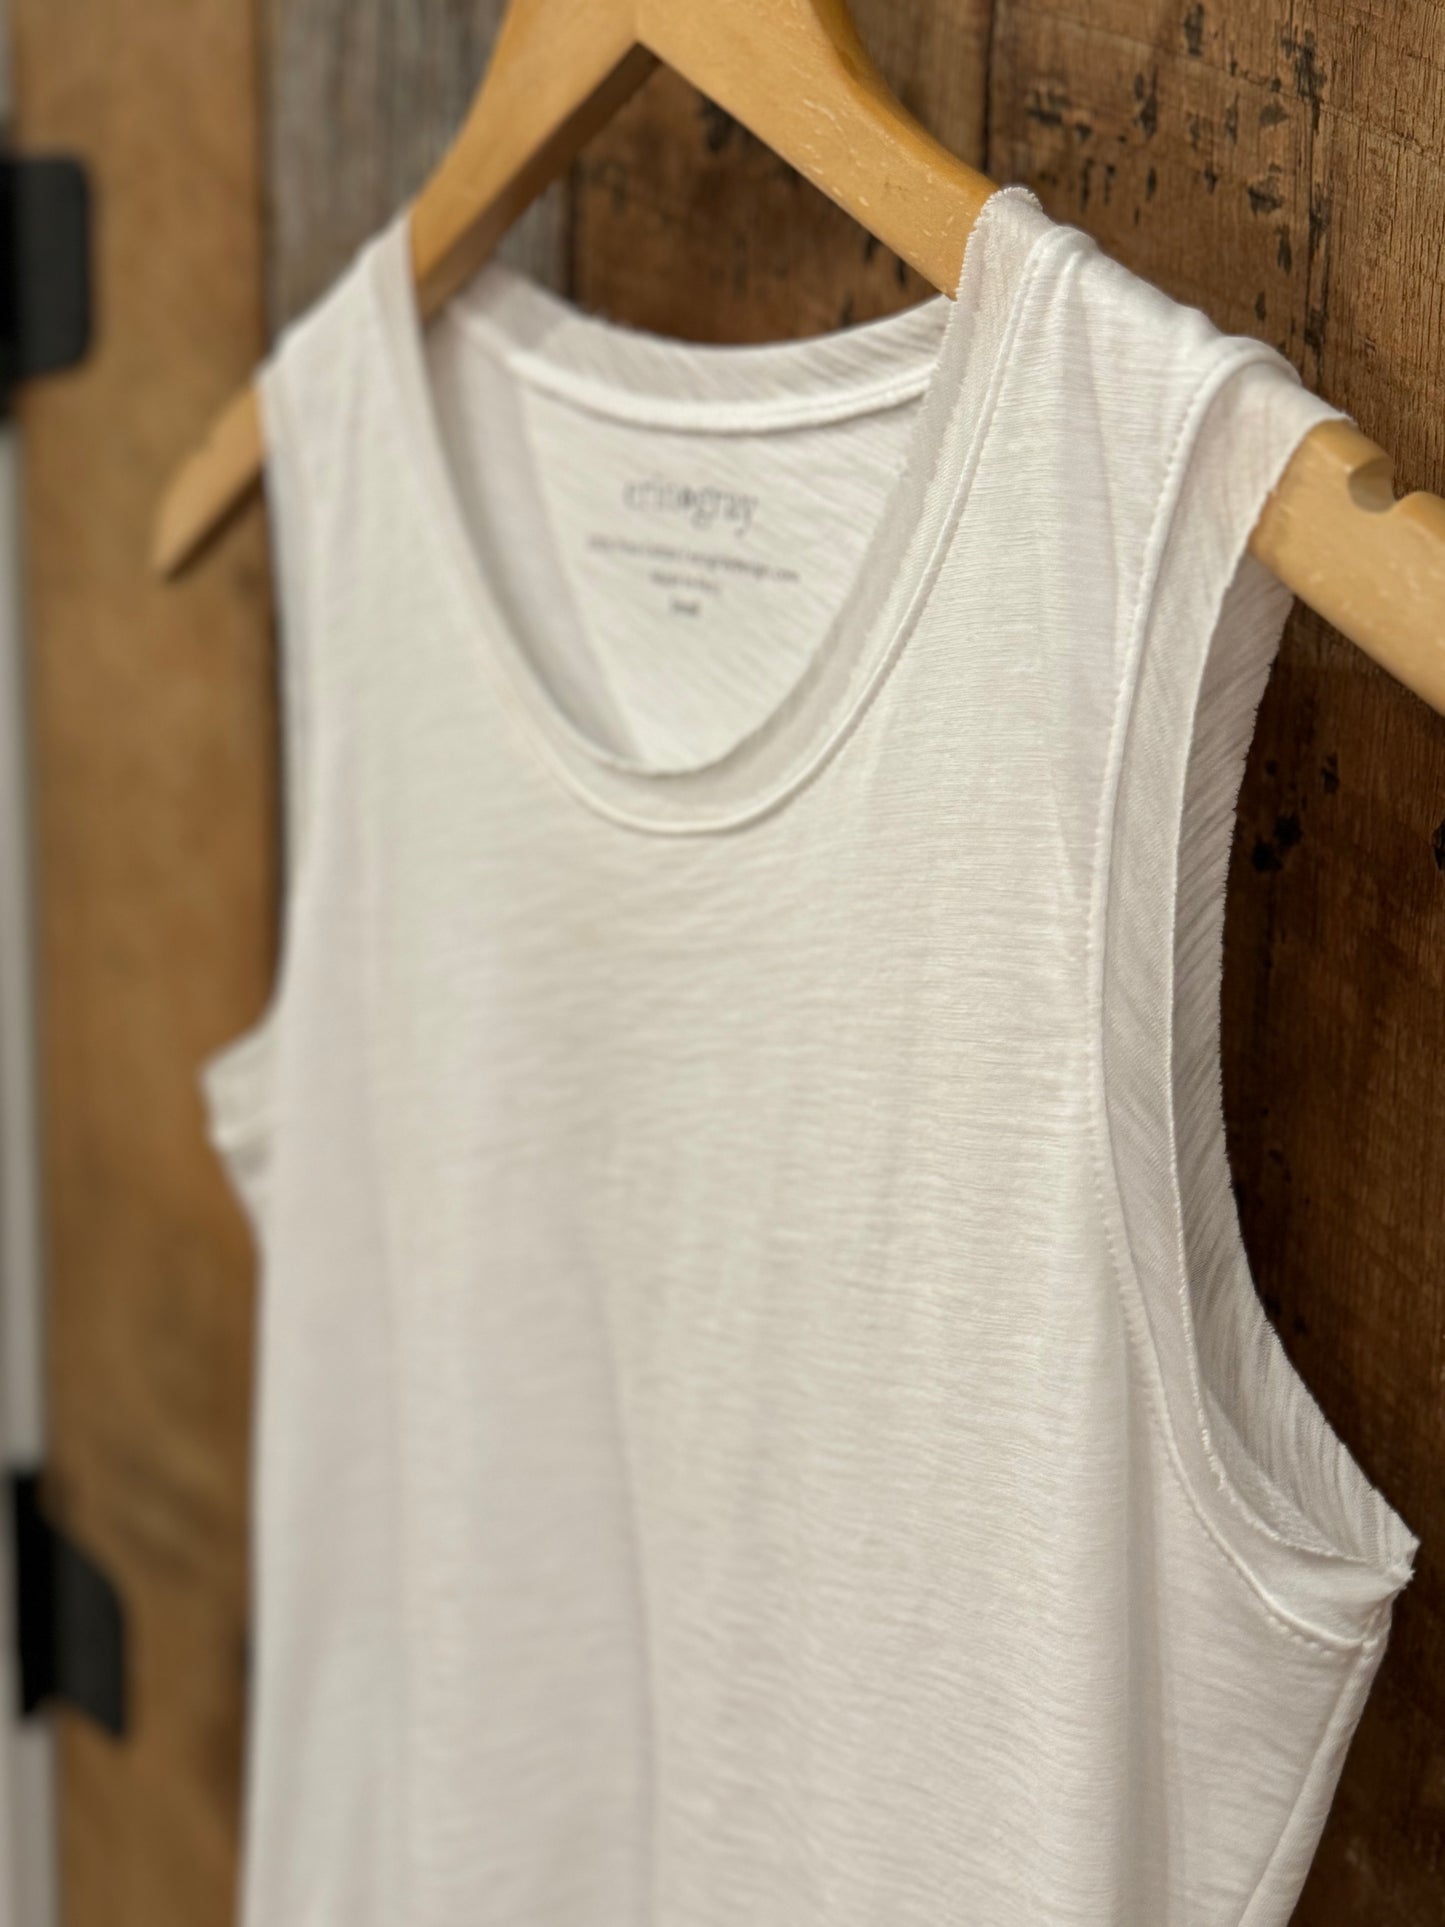 Erin Gray double lined tank